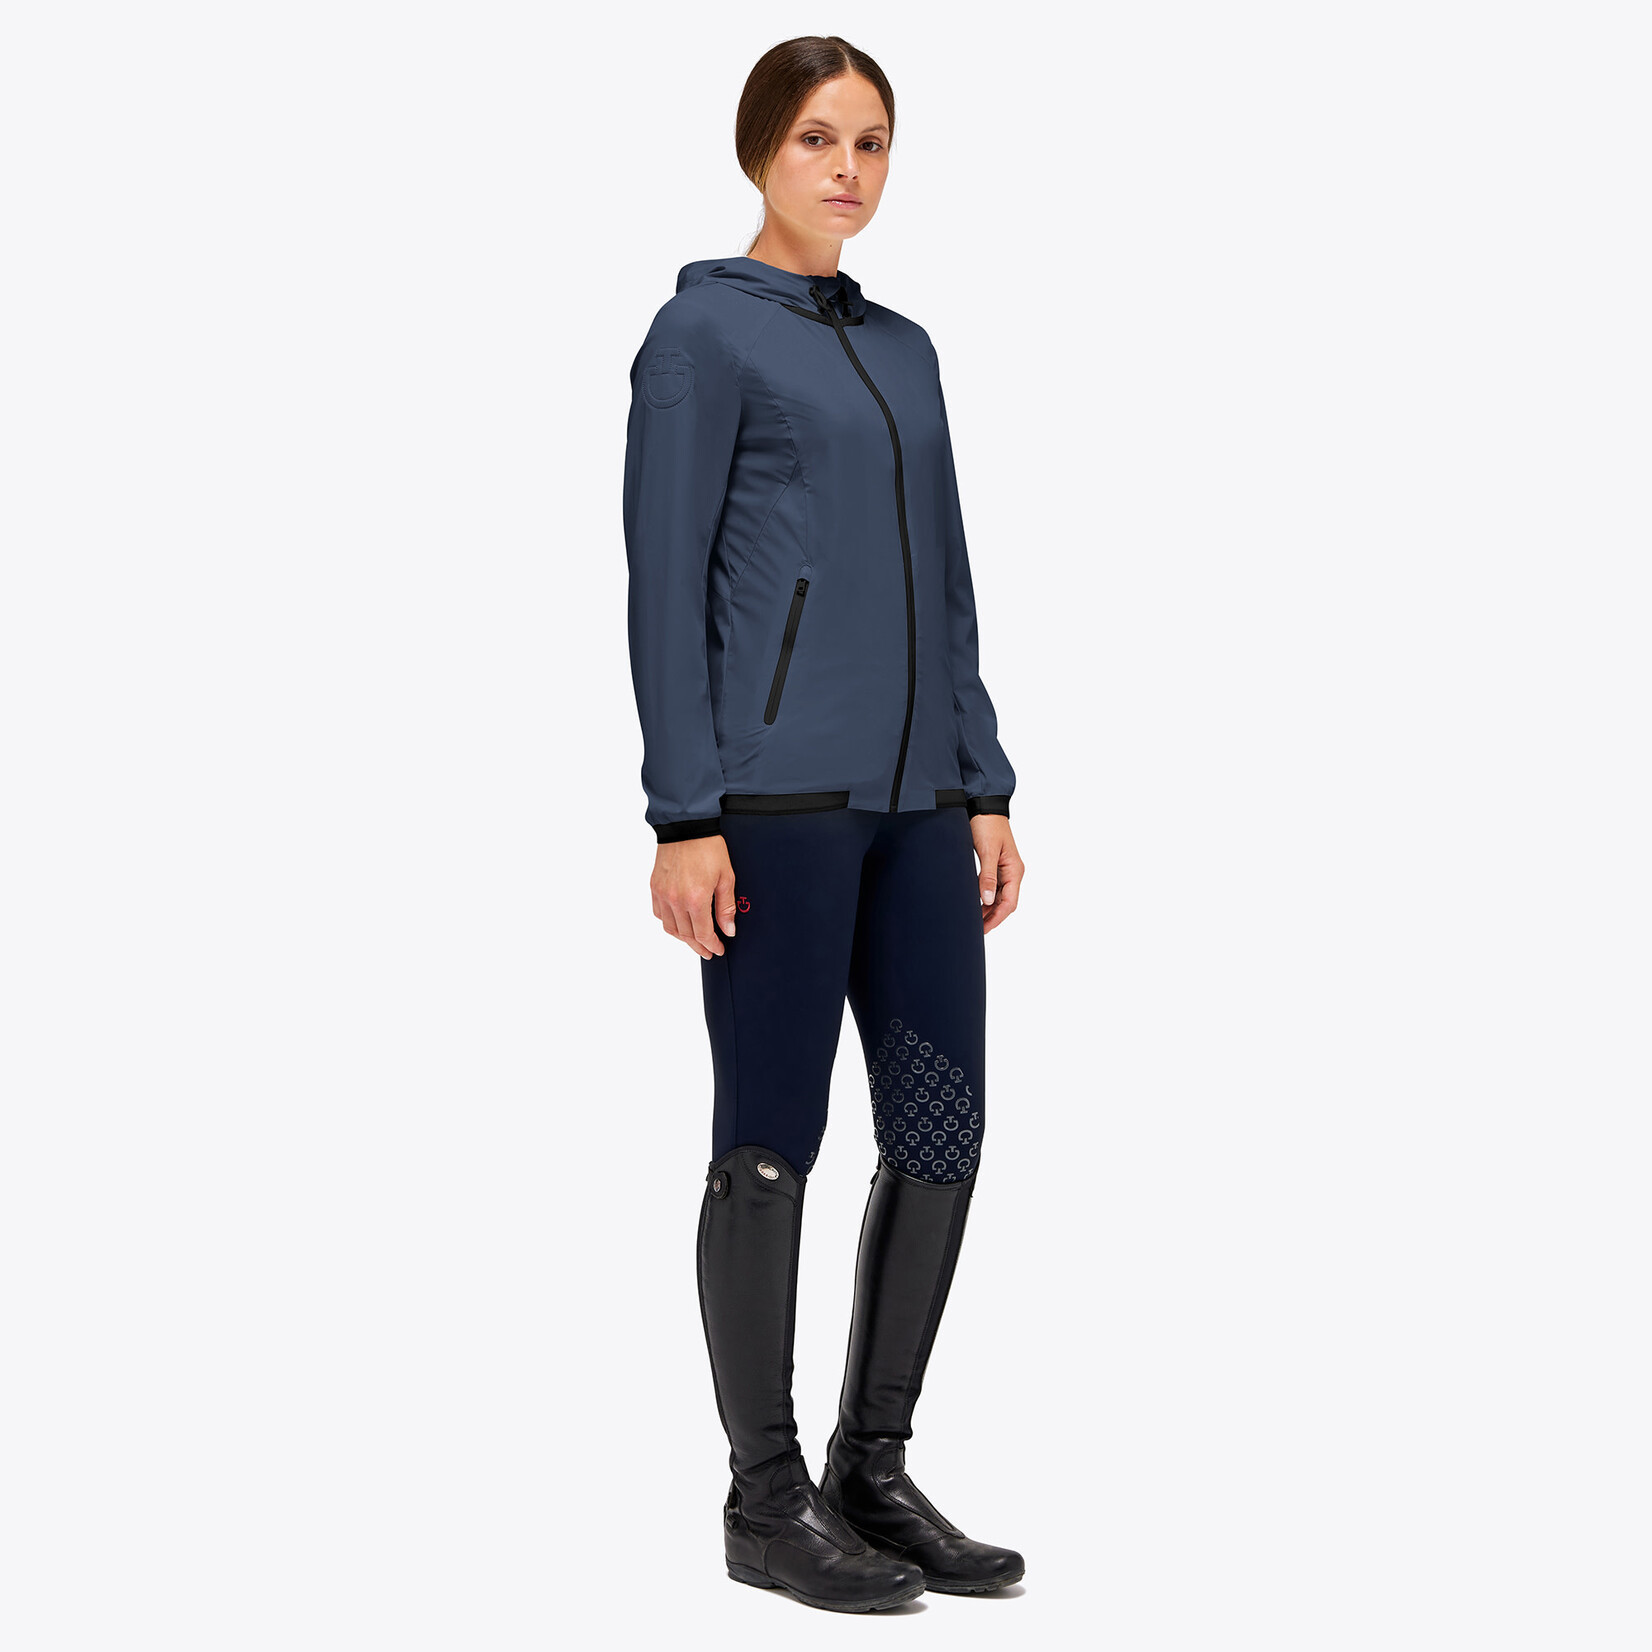 Cavalleria Toscana GID278 Cavalleria Toscana Lightweight Waterproof Hooded Jacket- perfect for warm climate riding